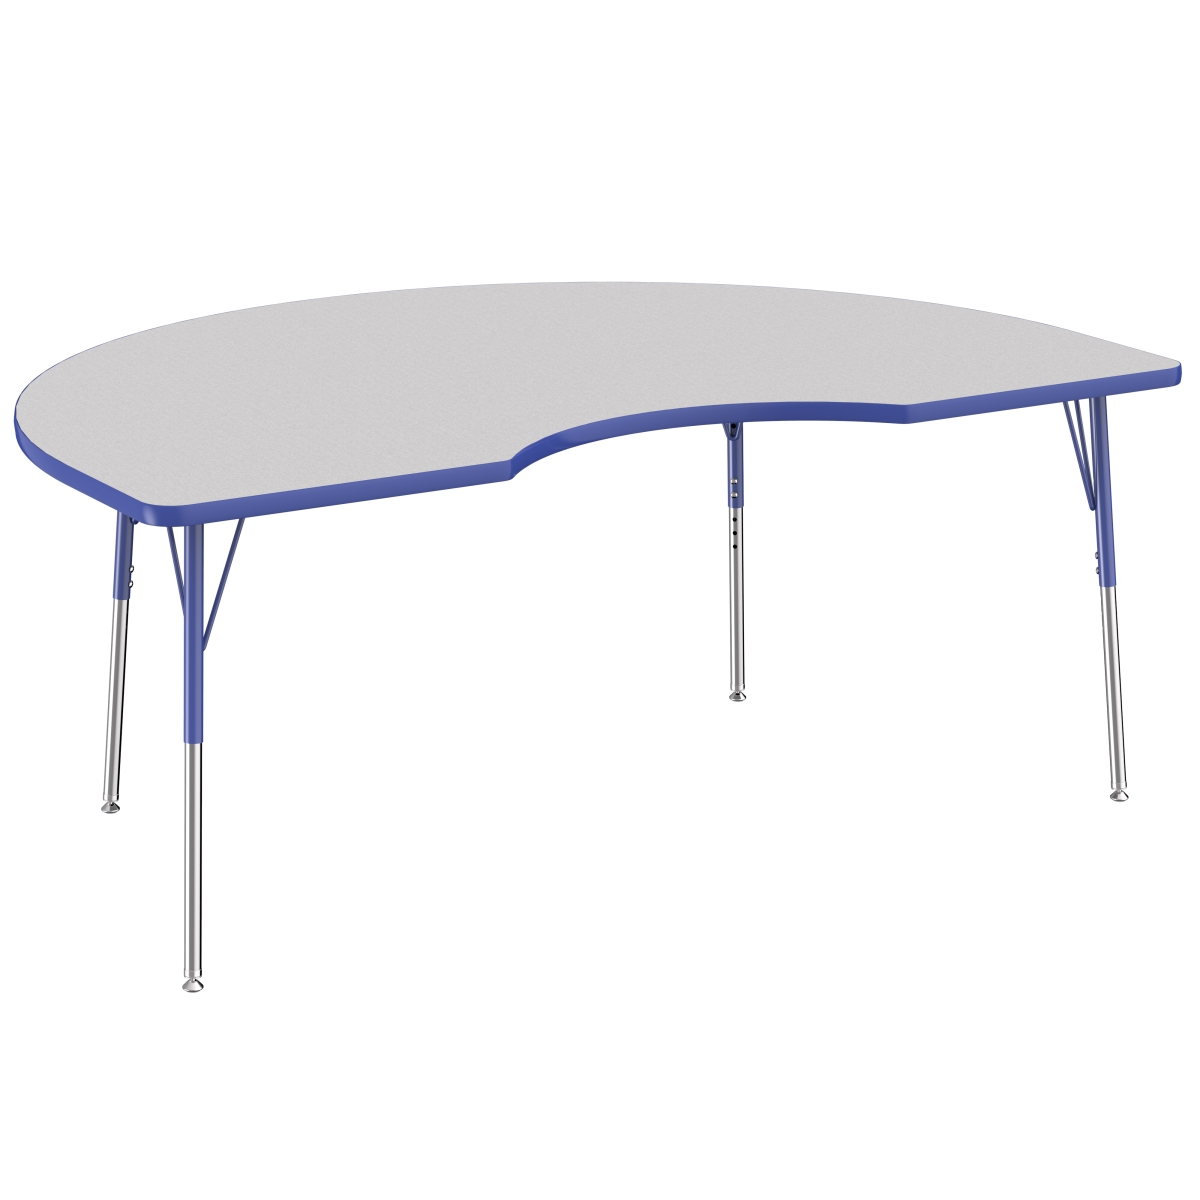 10085-gybl 48 X 72 In. Kidney T-mold Adjustable Activity Table With Standard Swivel - Grey & Blue